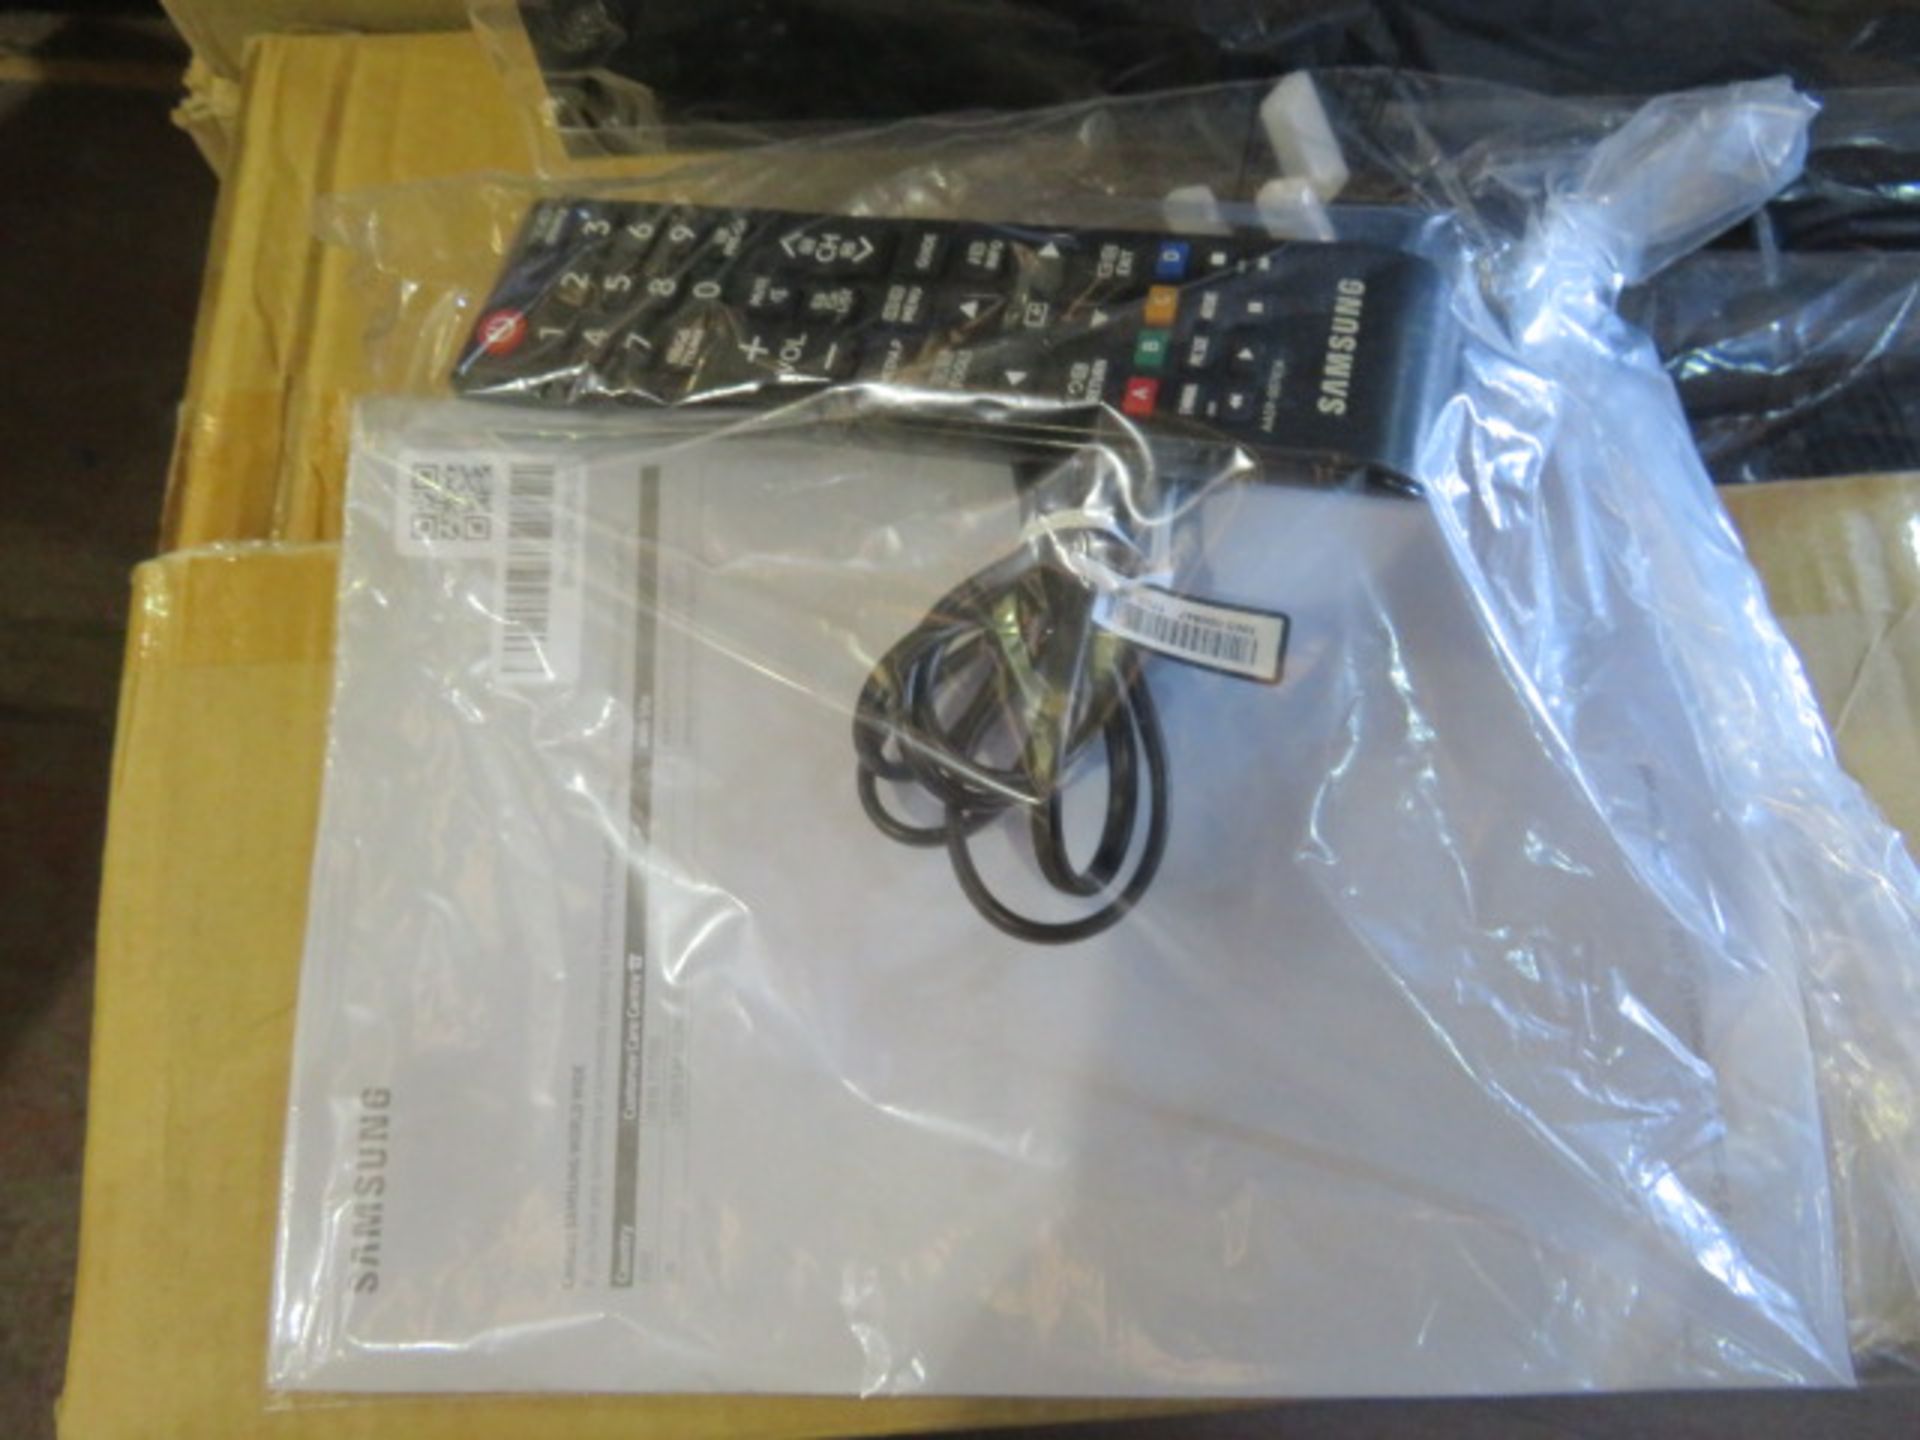 (14) 1 x Grade B - Sharp LC-24DHF4011K 24-Inch HD Ready TV with Freeview and DVD. - Image 3 of 8